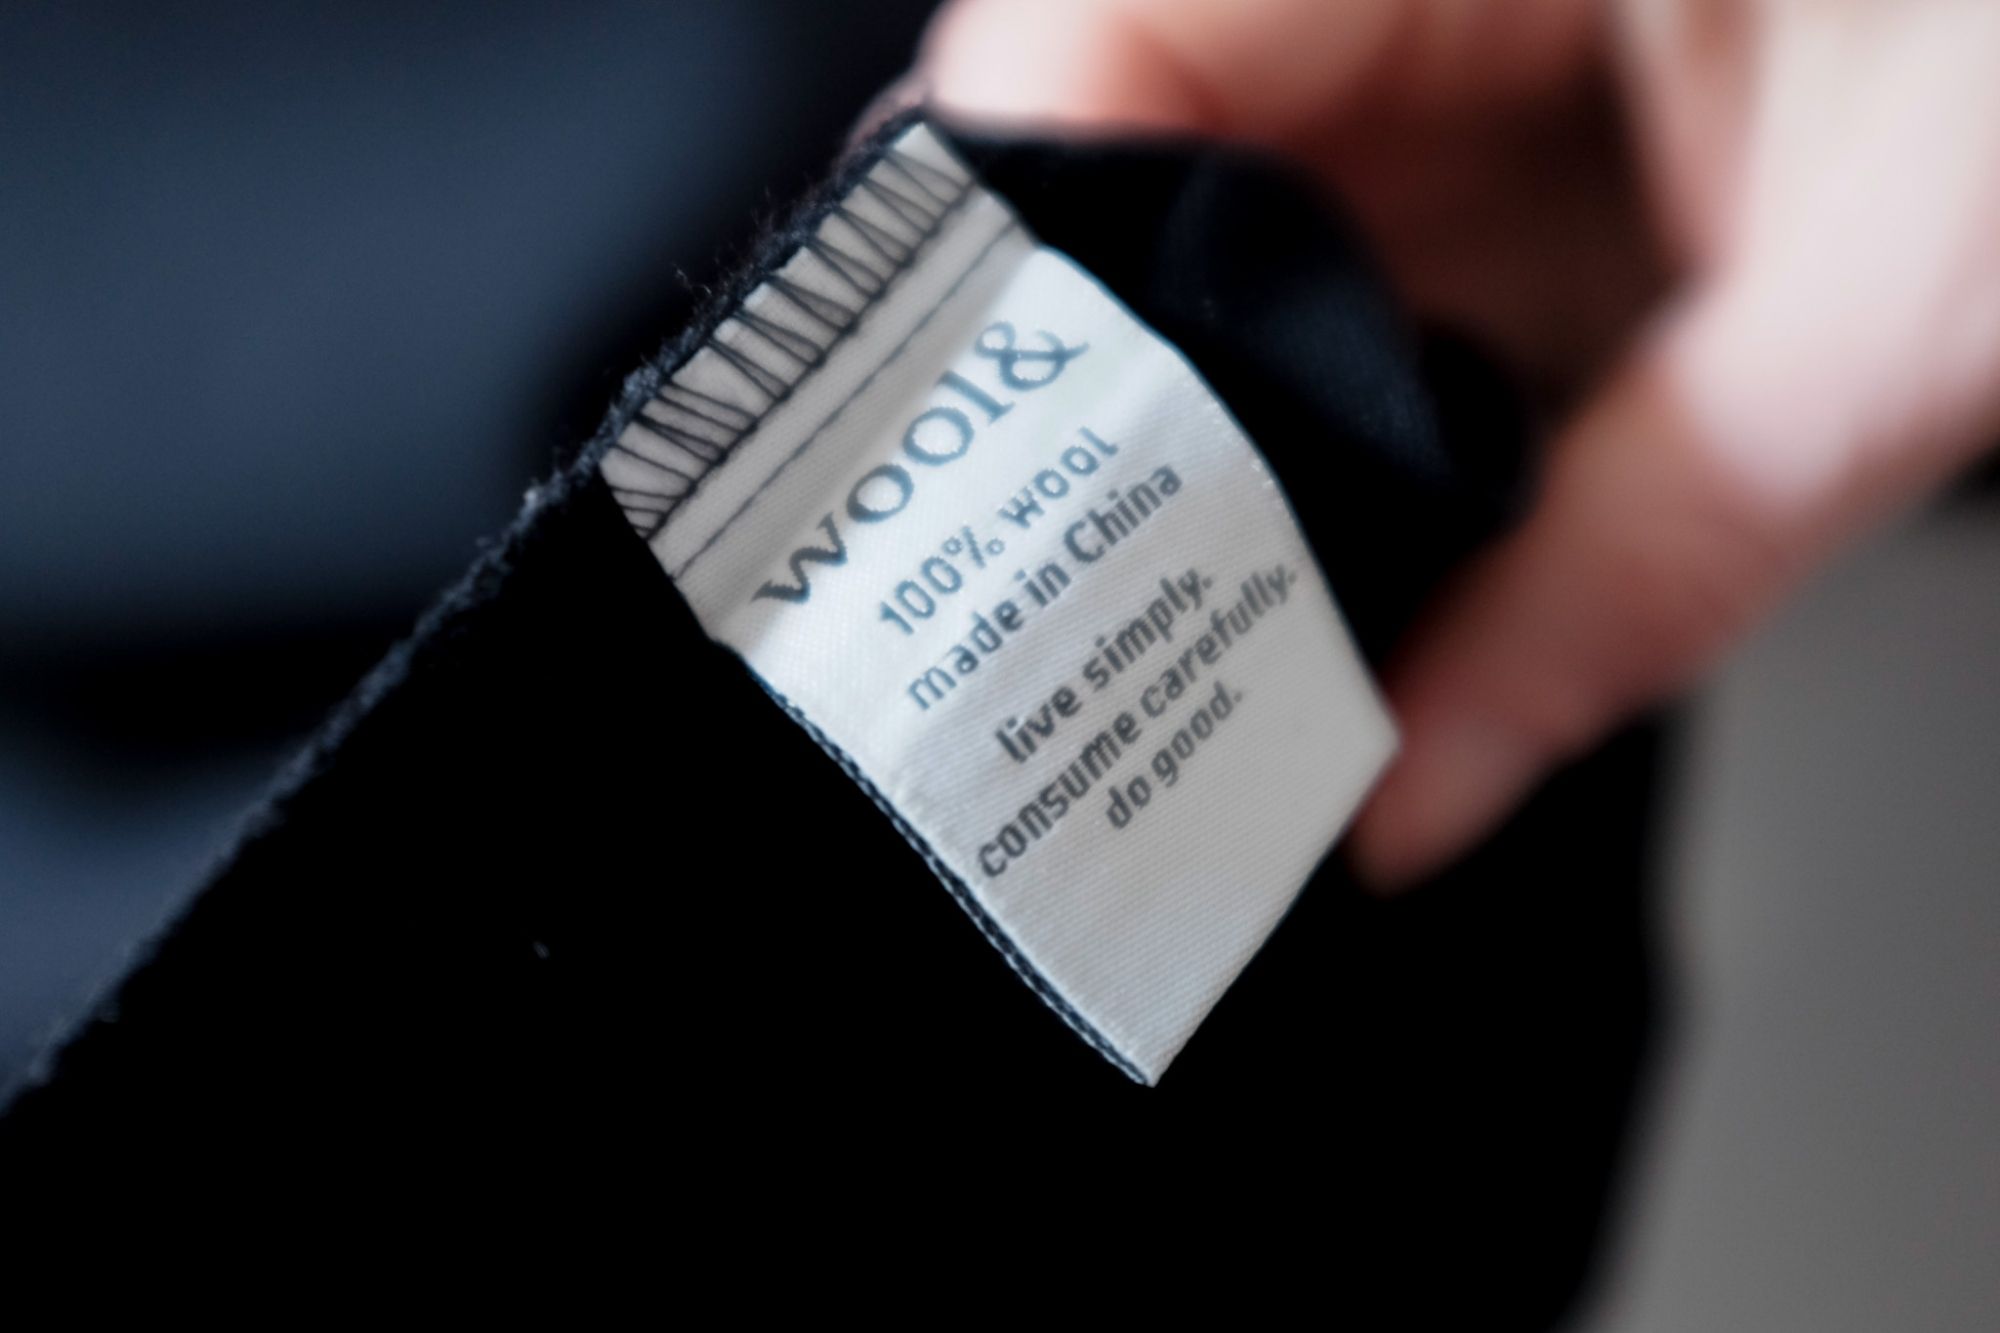 An image of the fabric tag